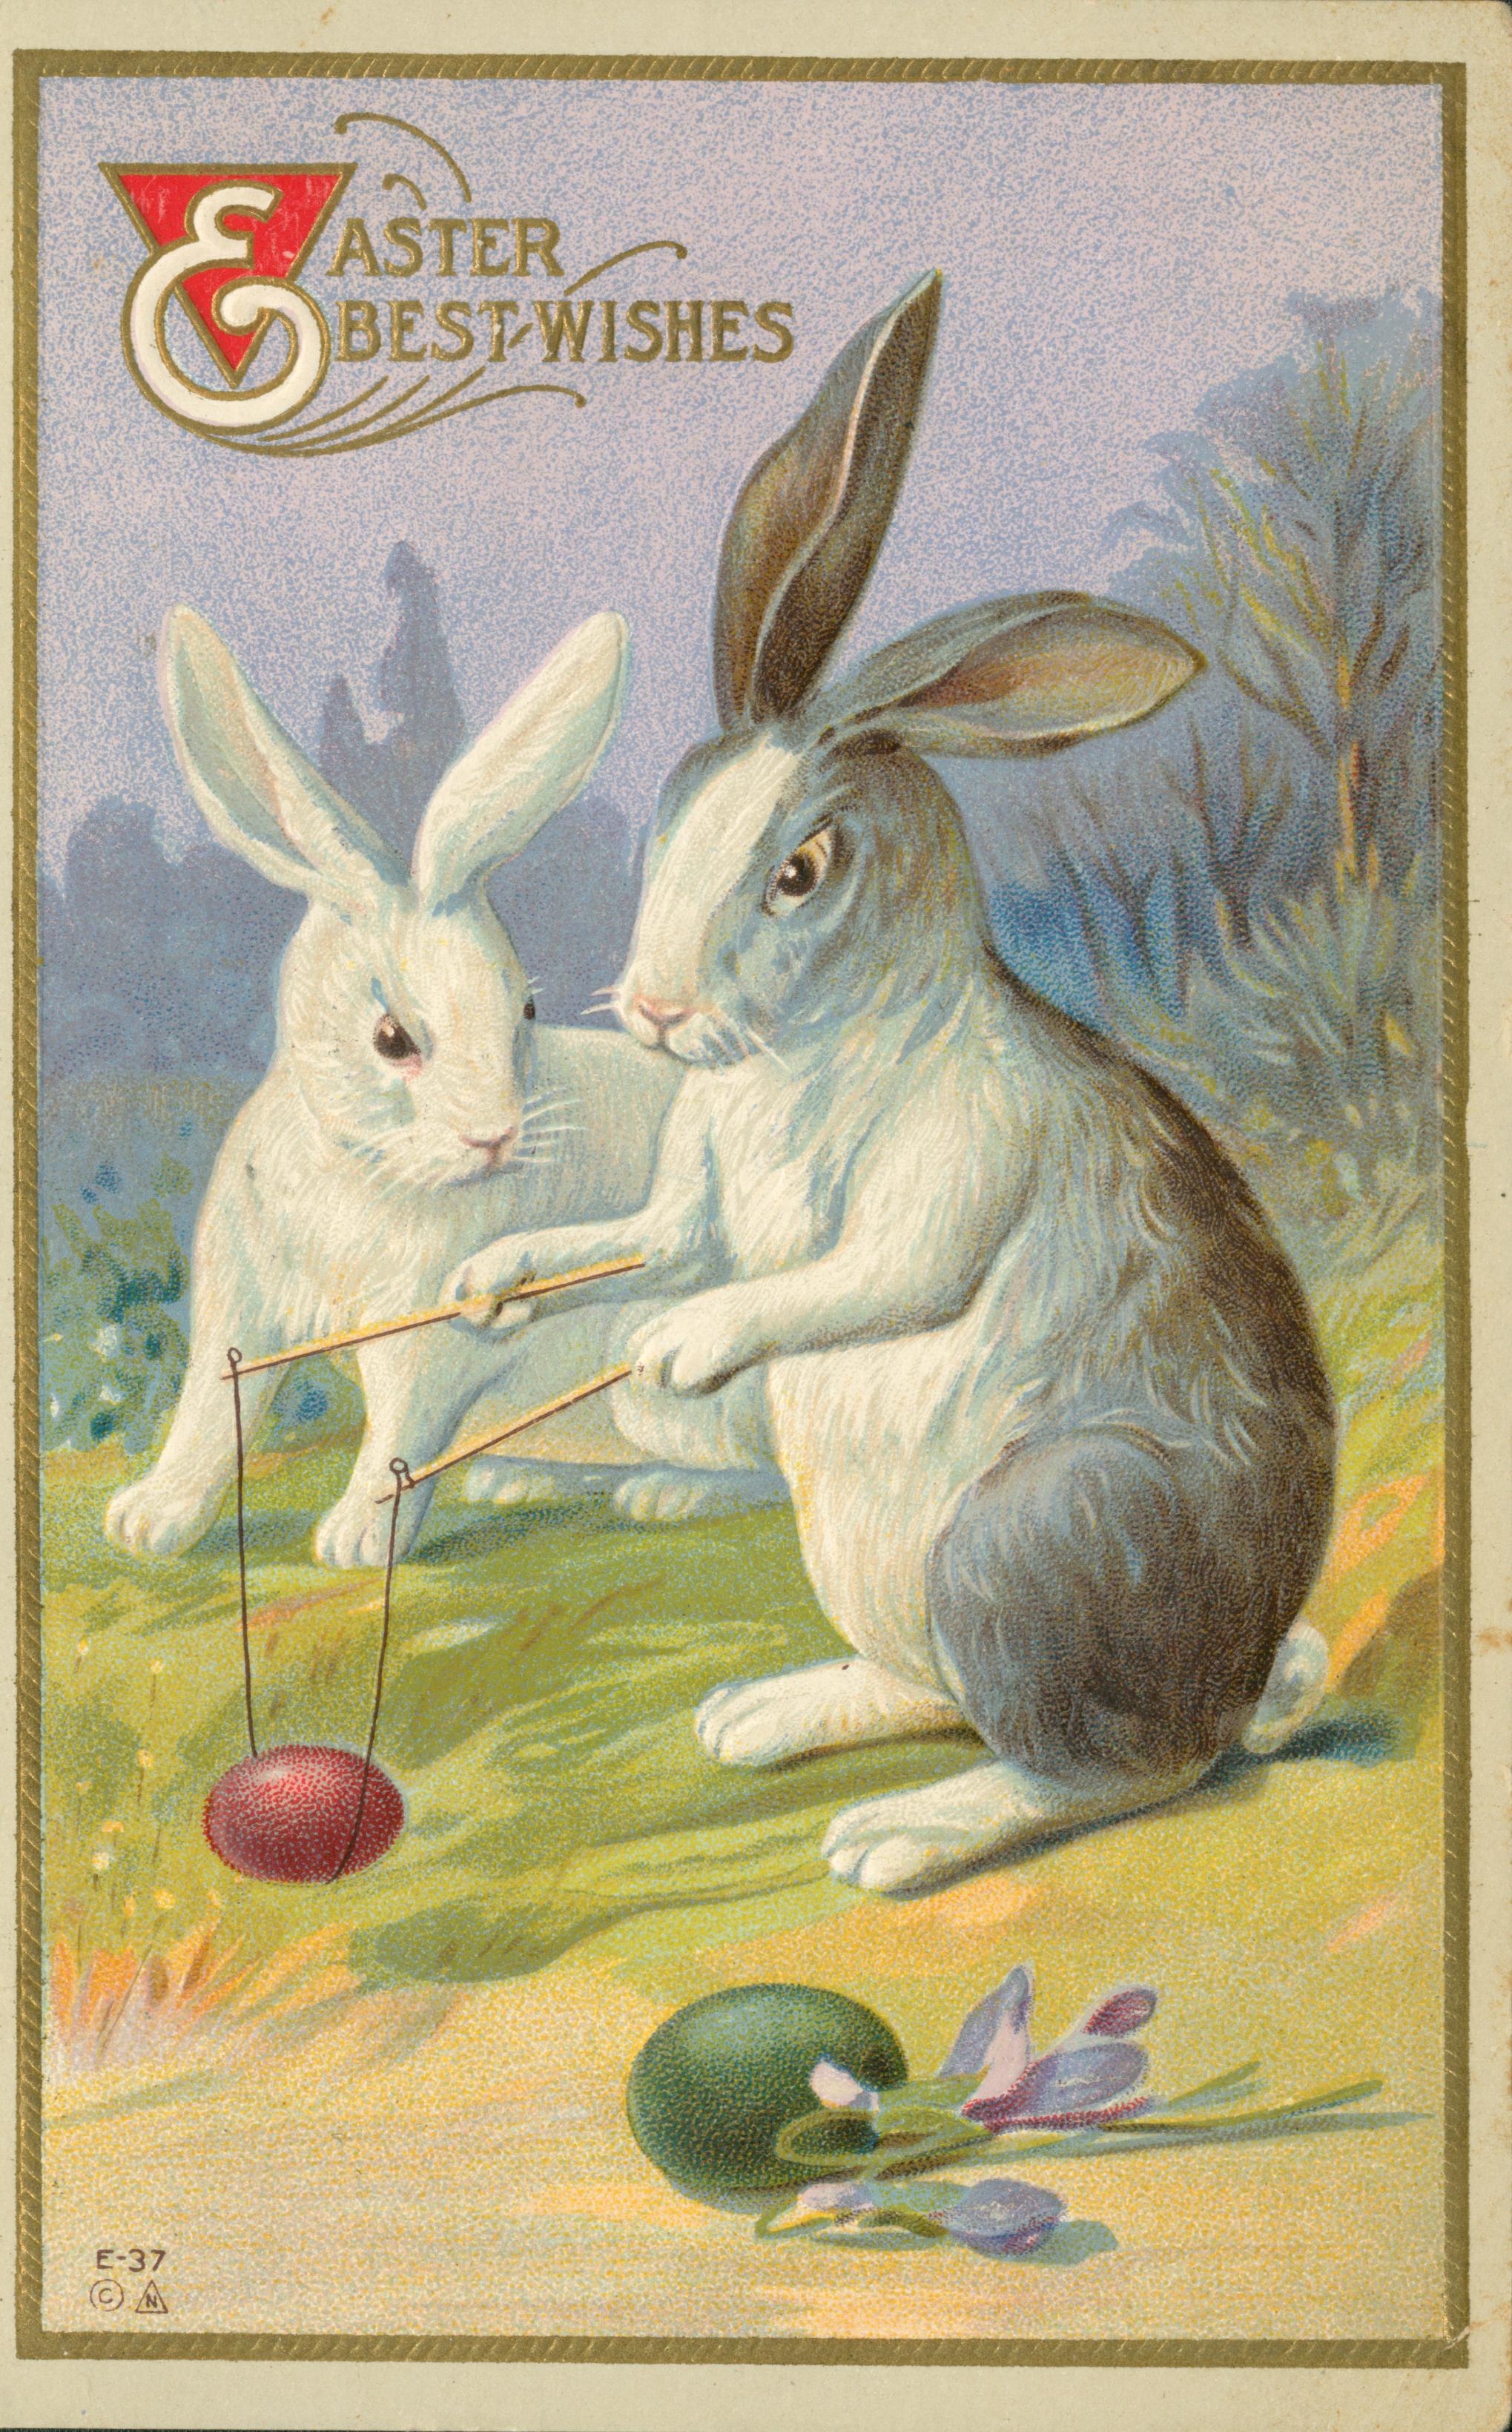 Two rabbits playing a game with an egg.